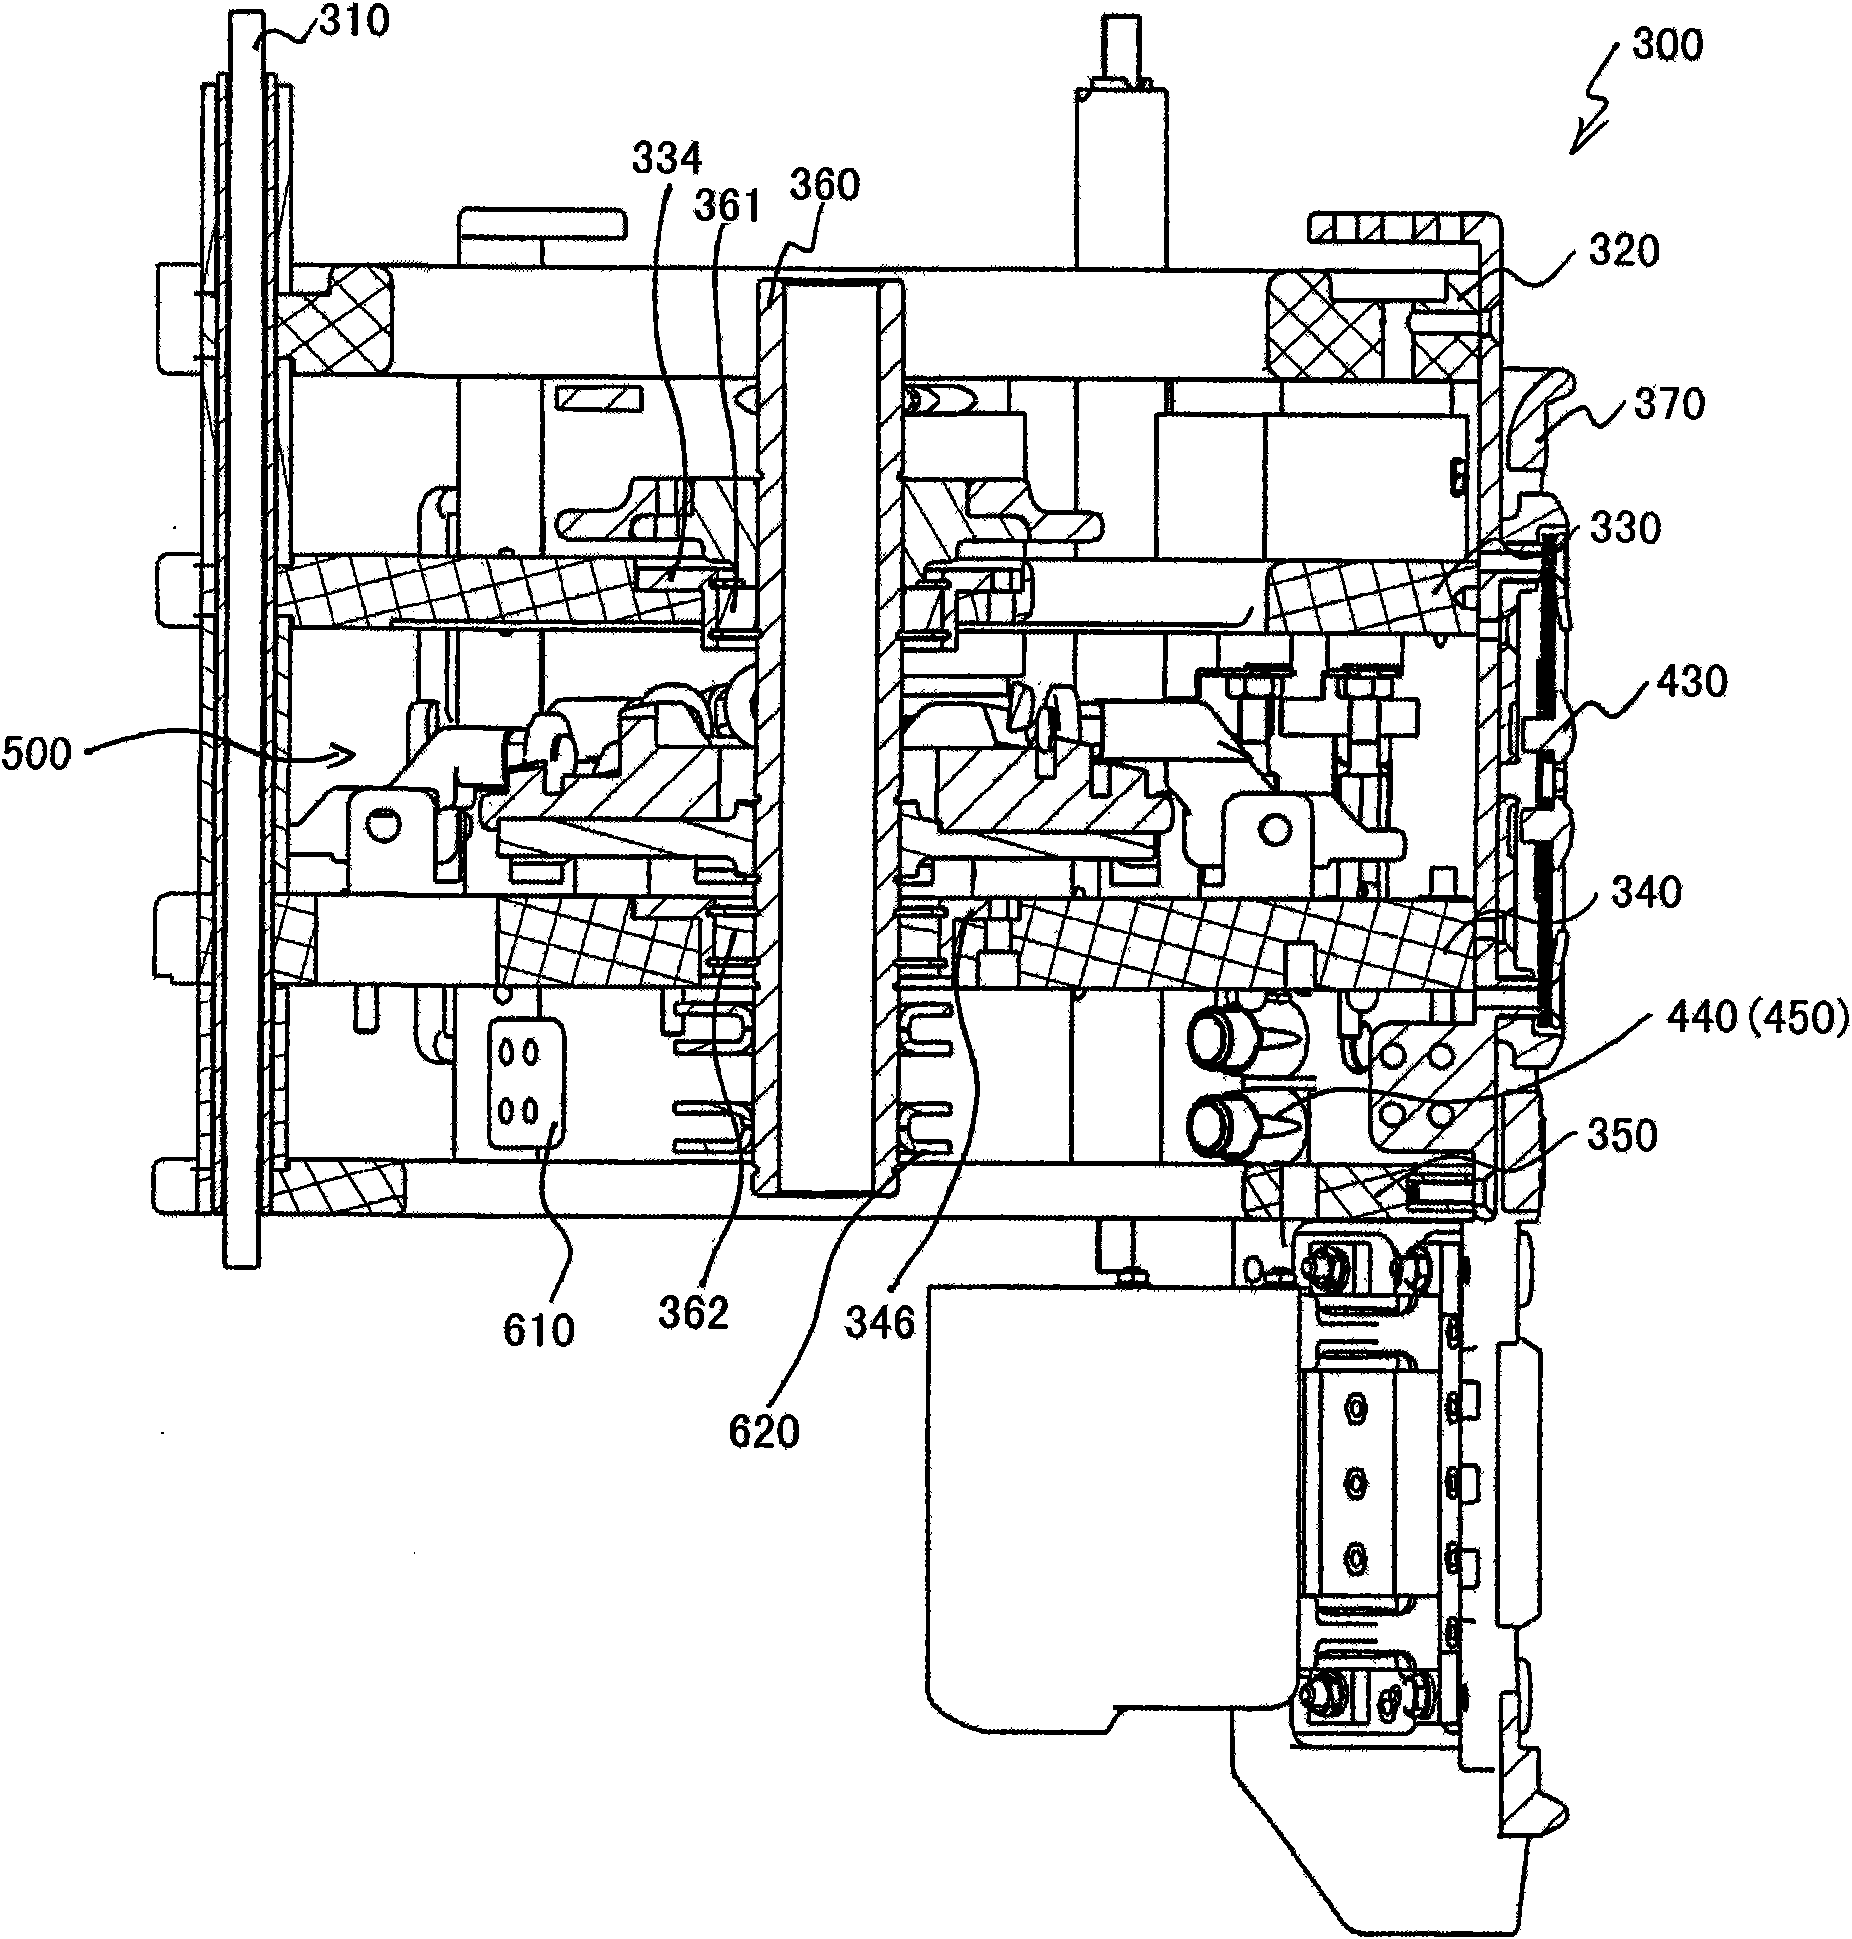 Vacuum vessel switching core used by on-load tap-changer